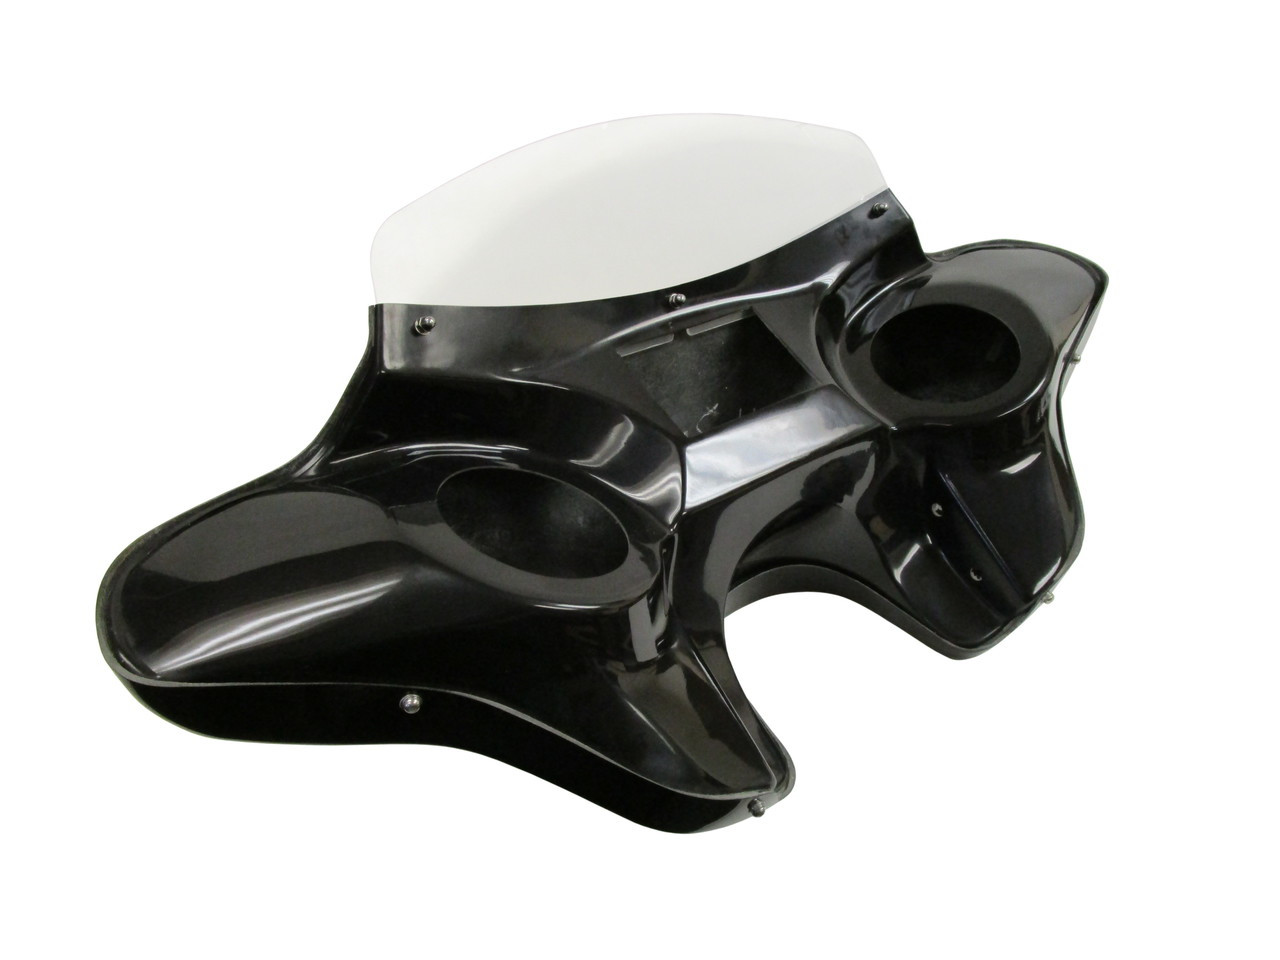 Dyna Low Rider Batwing Fairing